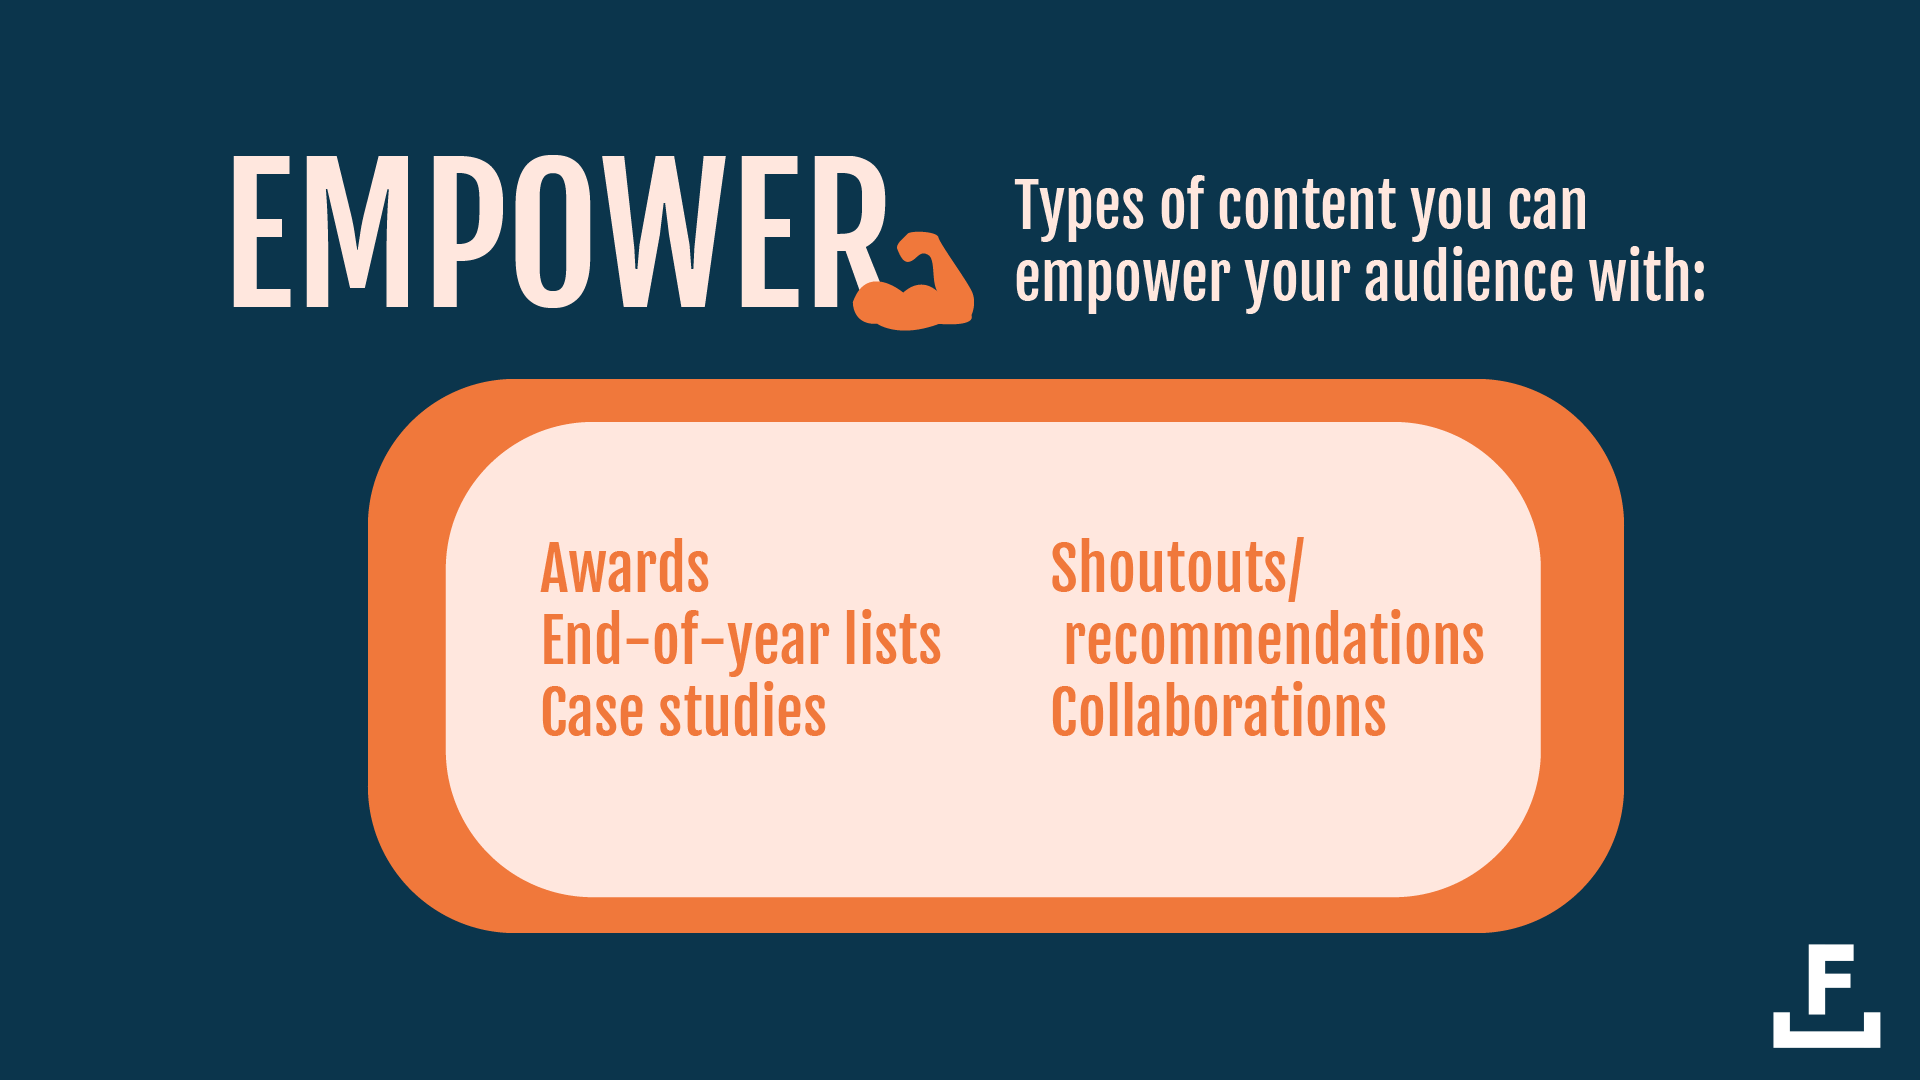 An image showing the types of content that work well to empower an audience